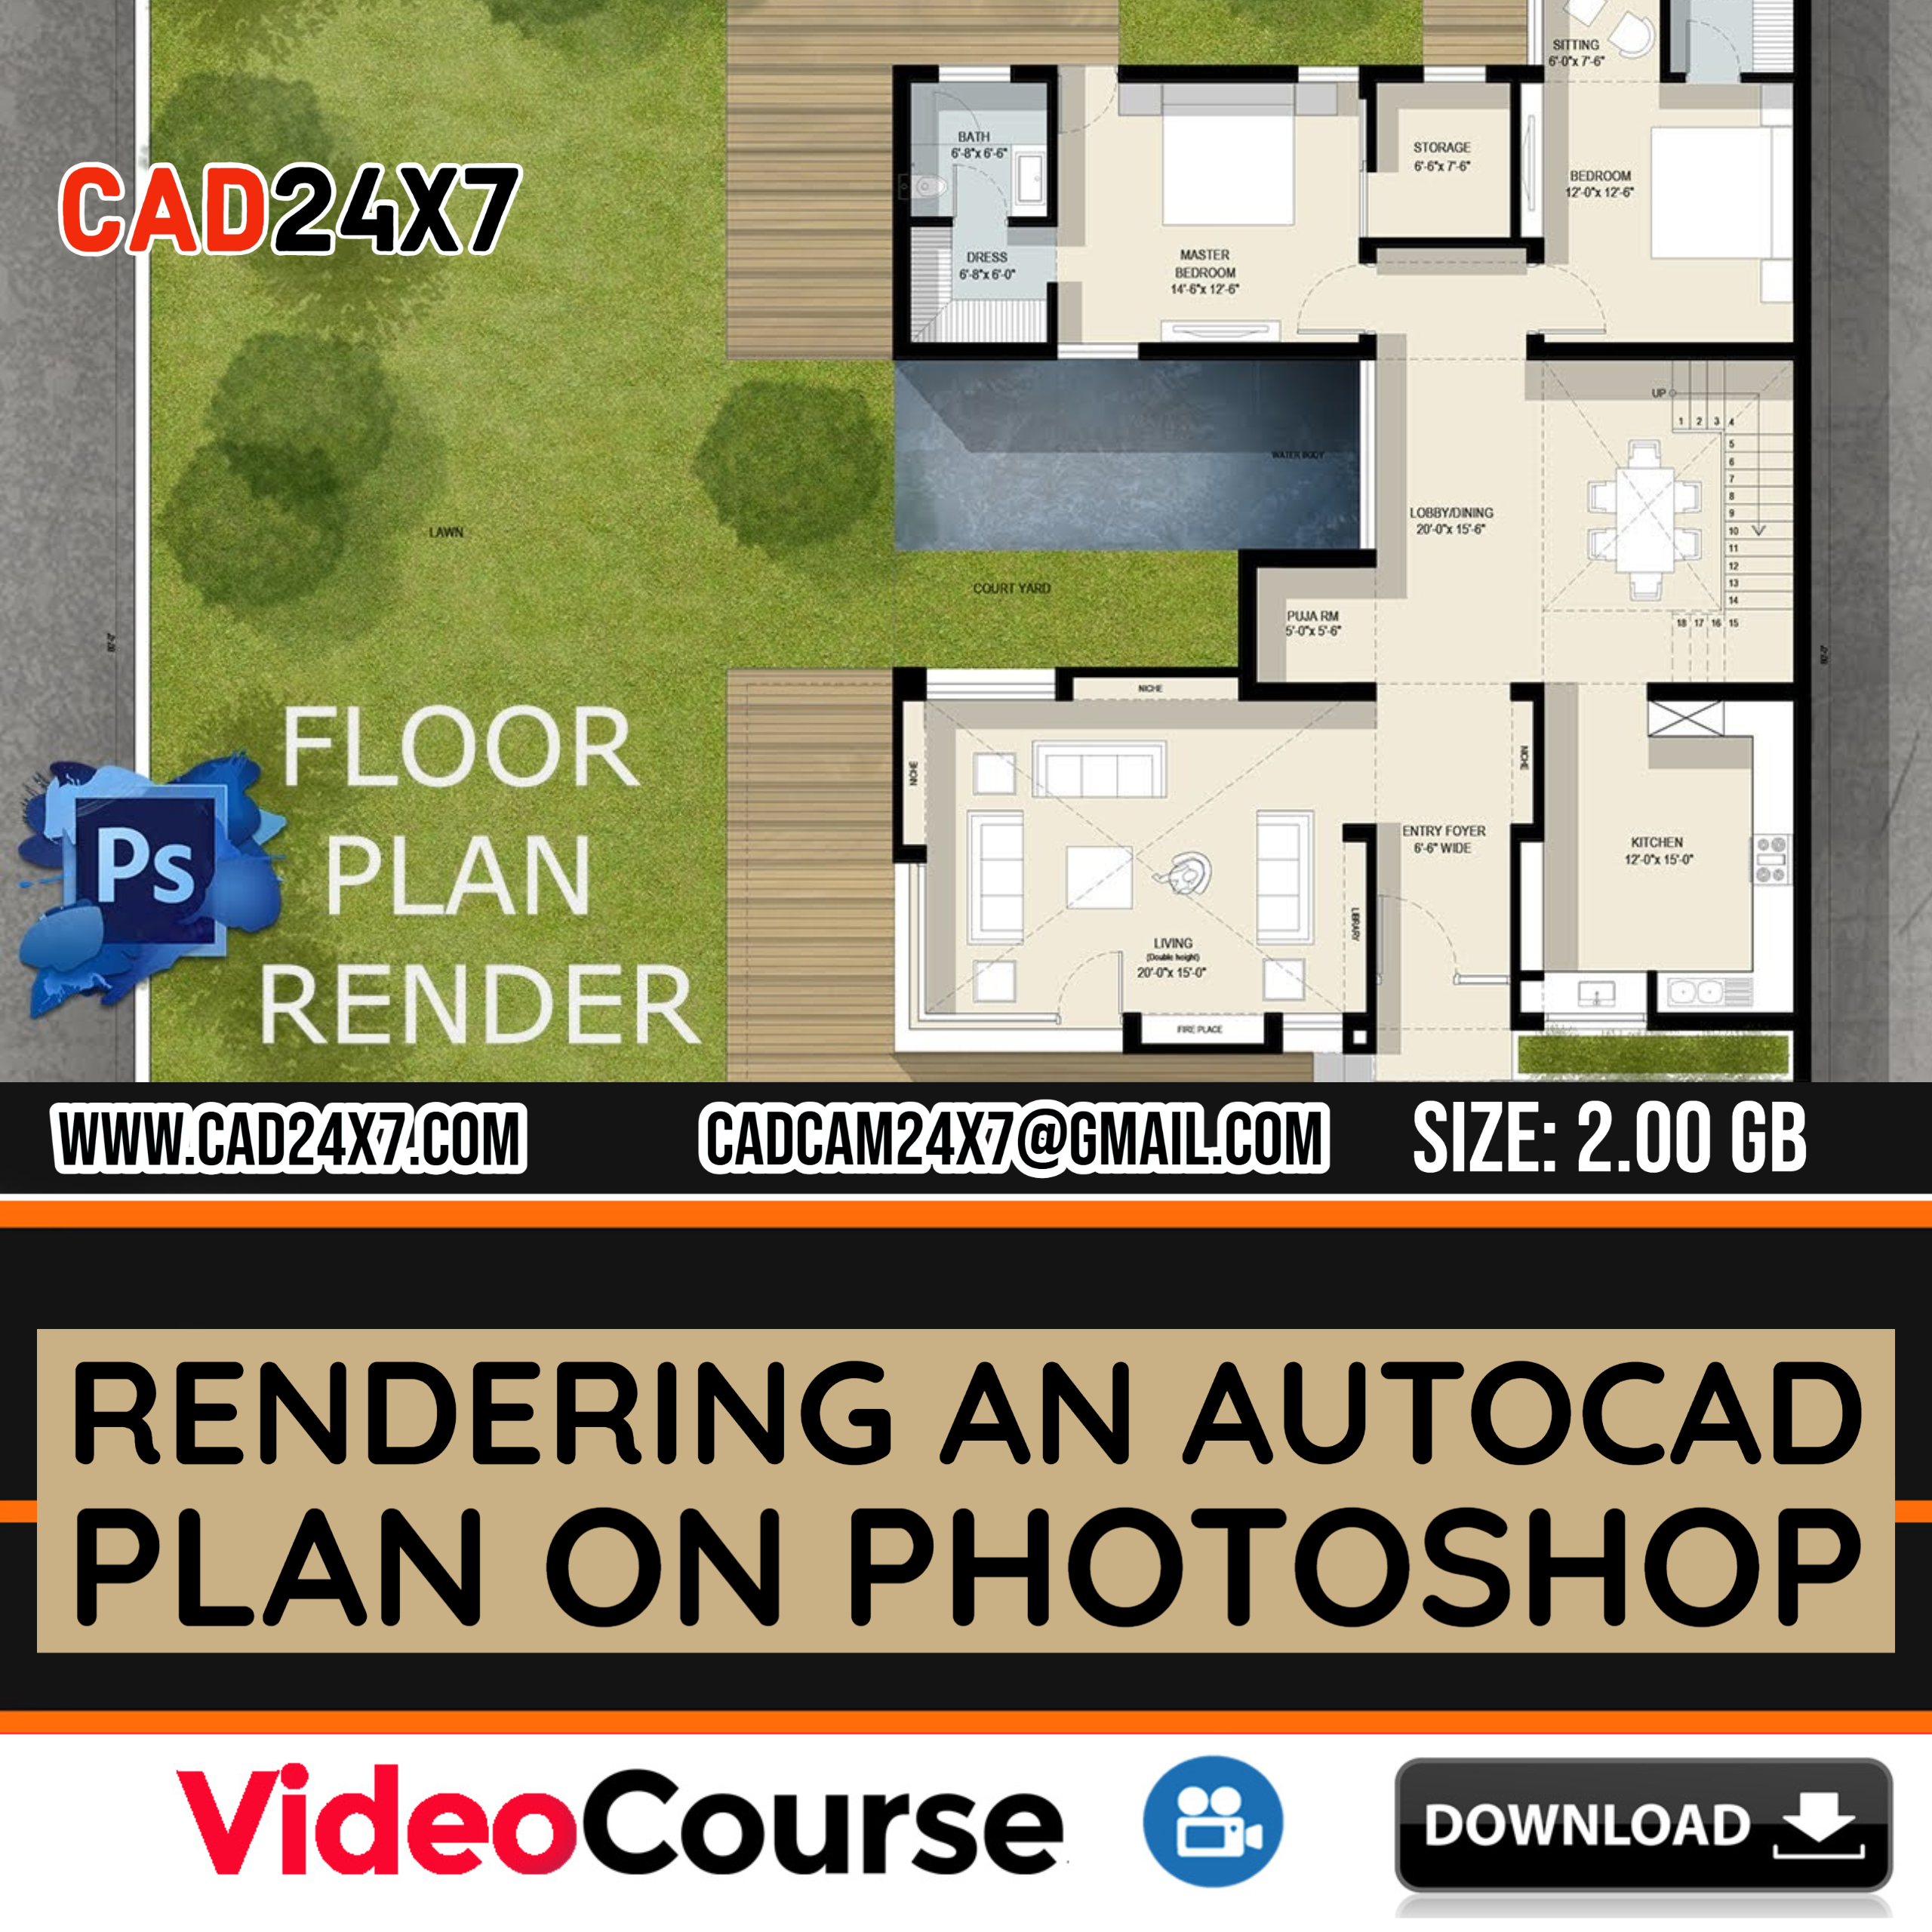 Rendering an AUTOCAD plan on Photoshop